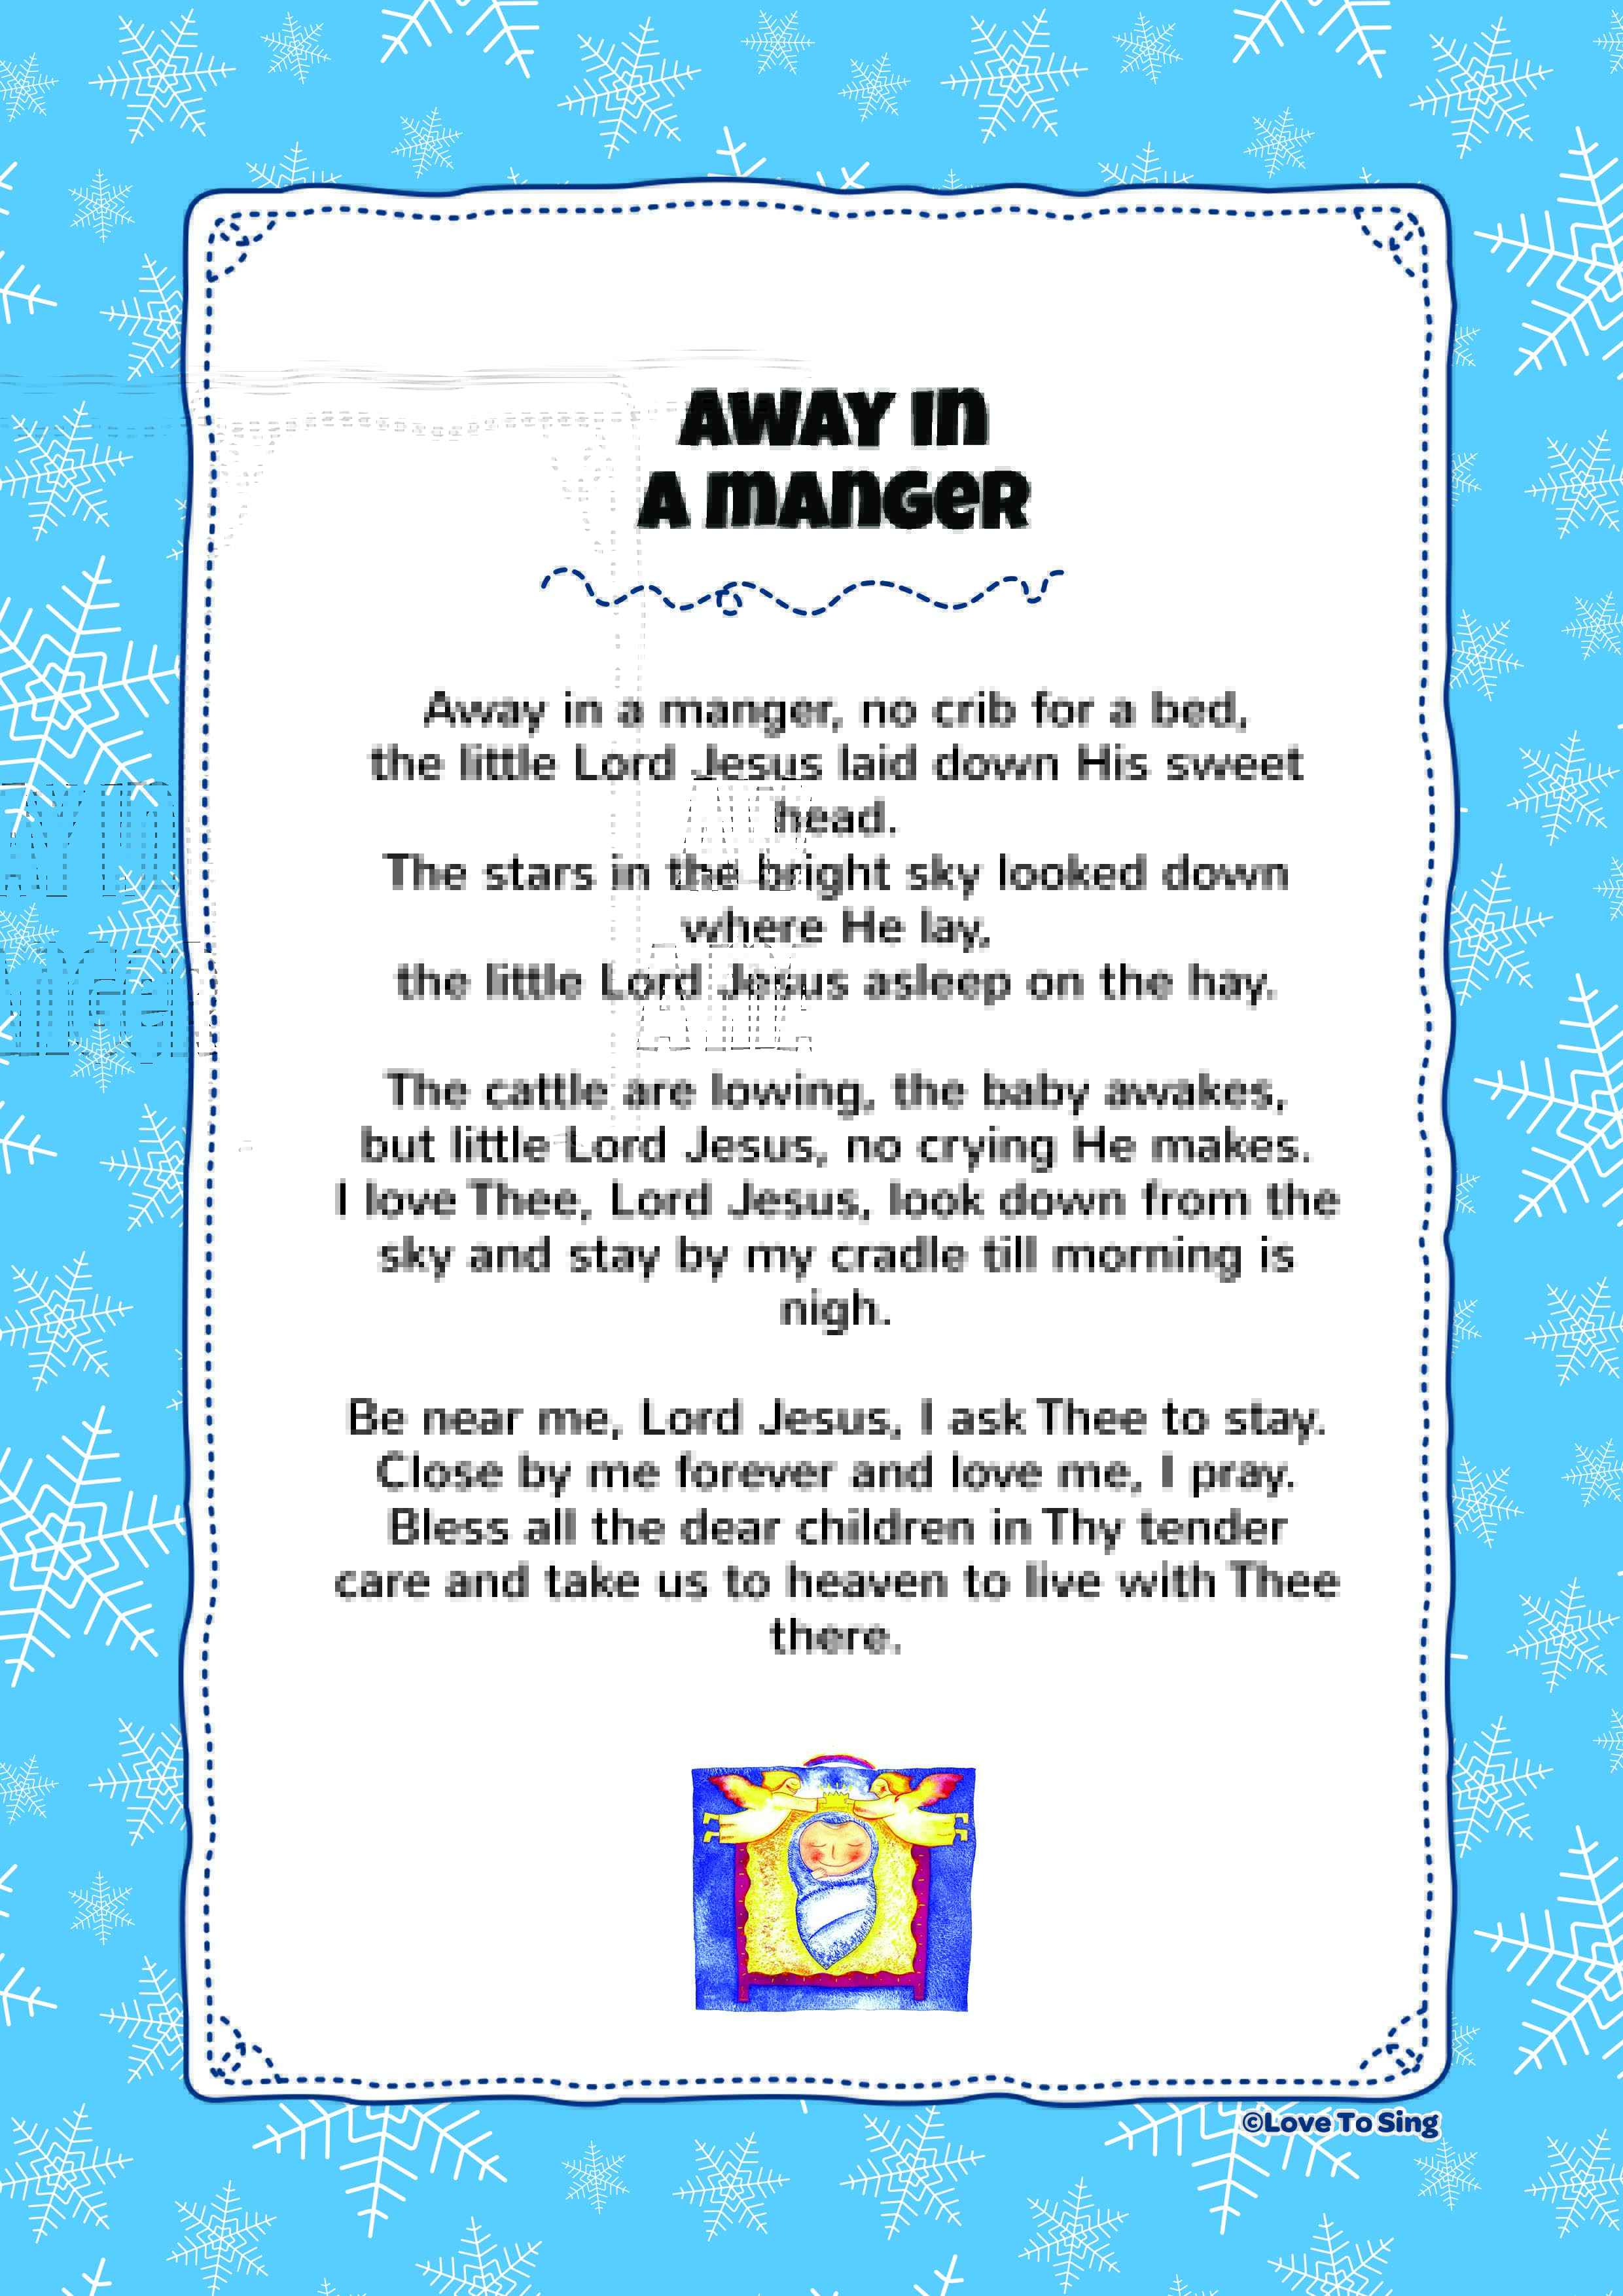 Away In A Manger | Kids Video Song with FREE Lyrics & Activities!